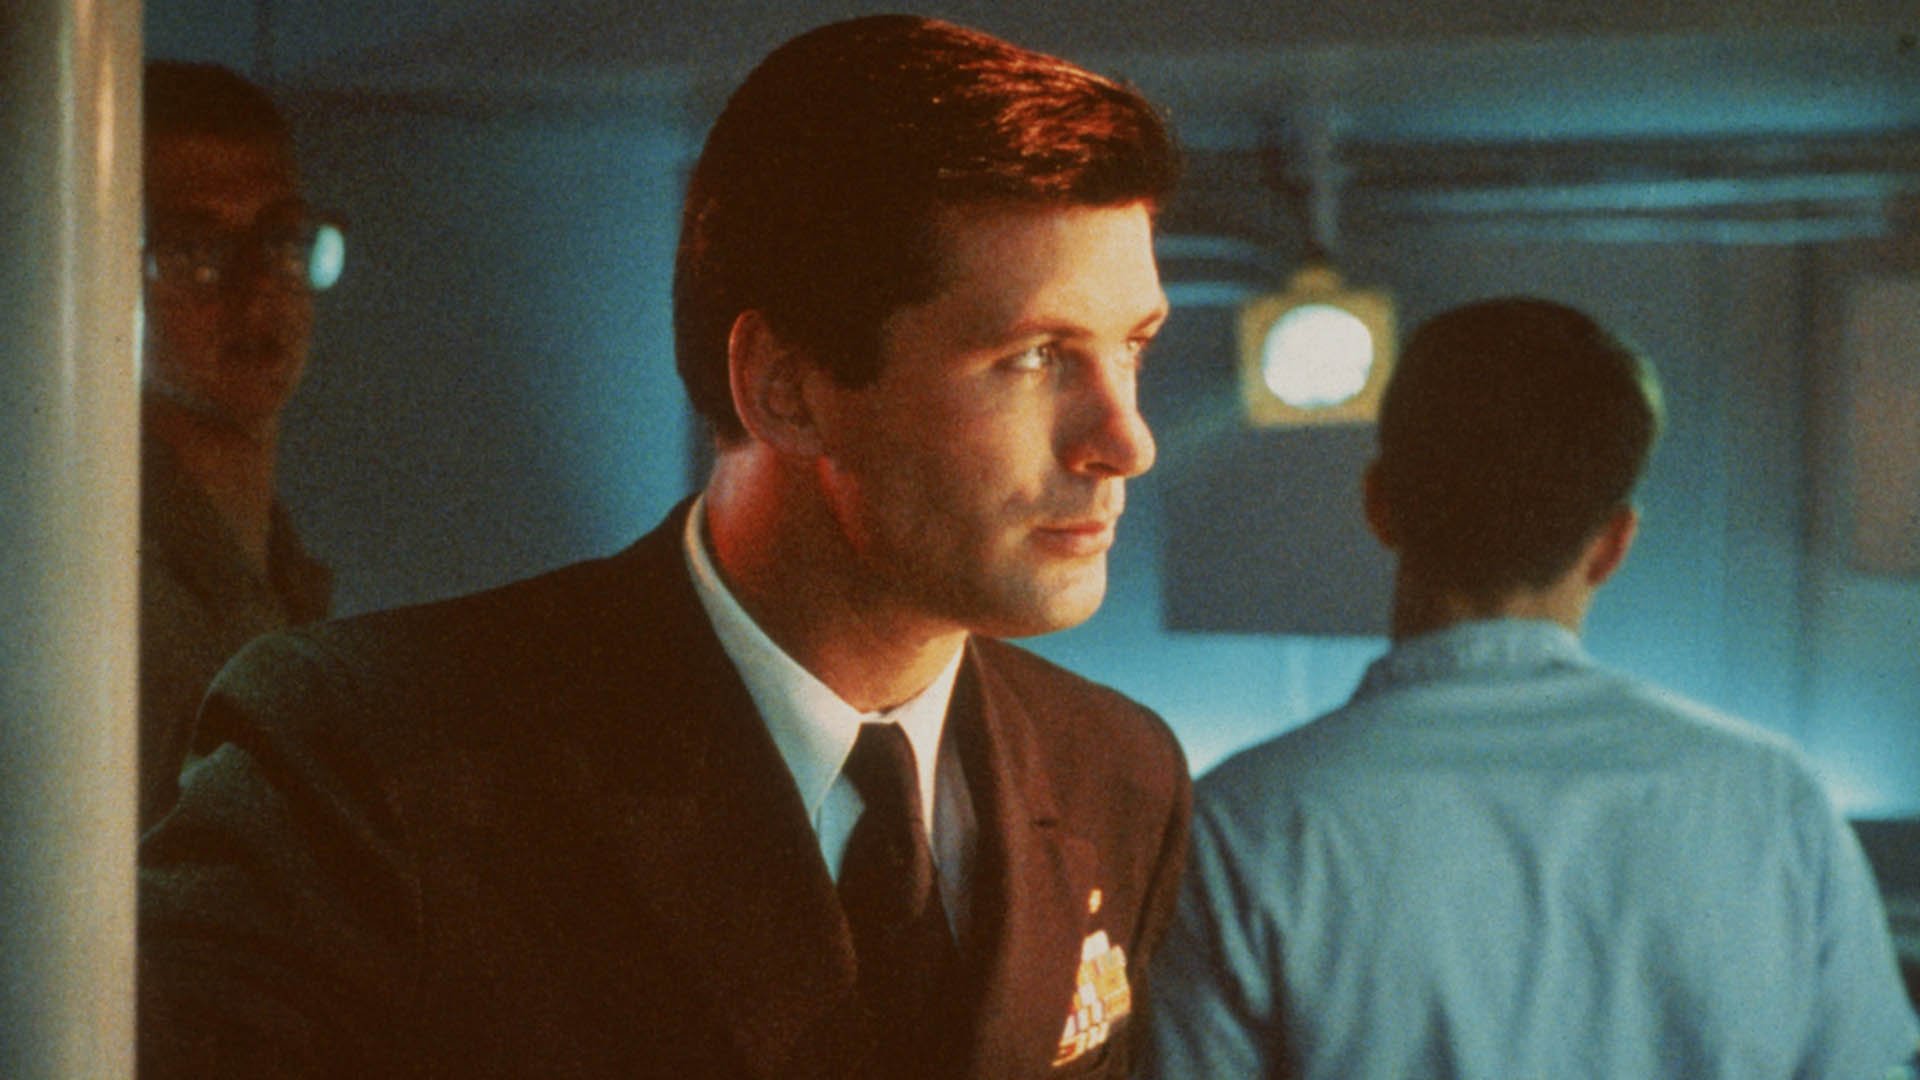 Alec Baldwin's youth in The Hunt for Red October